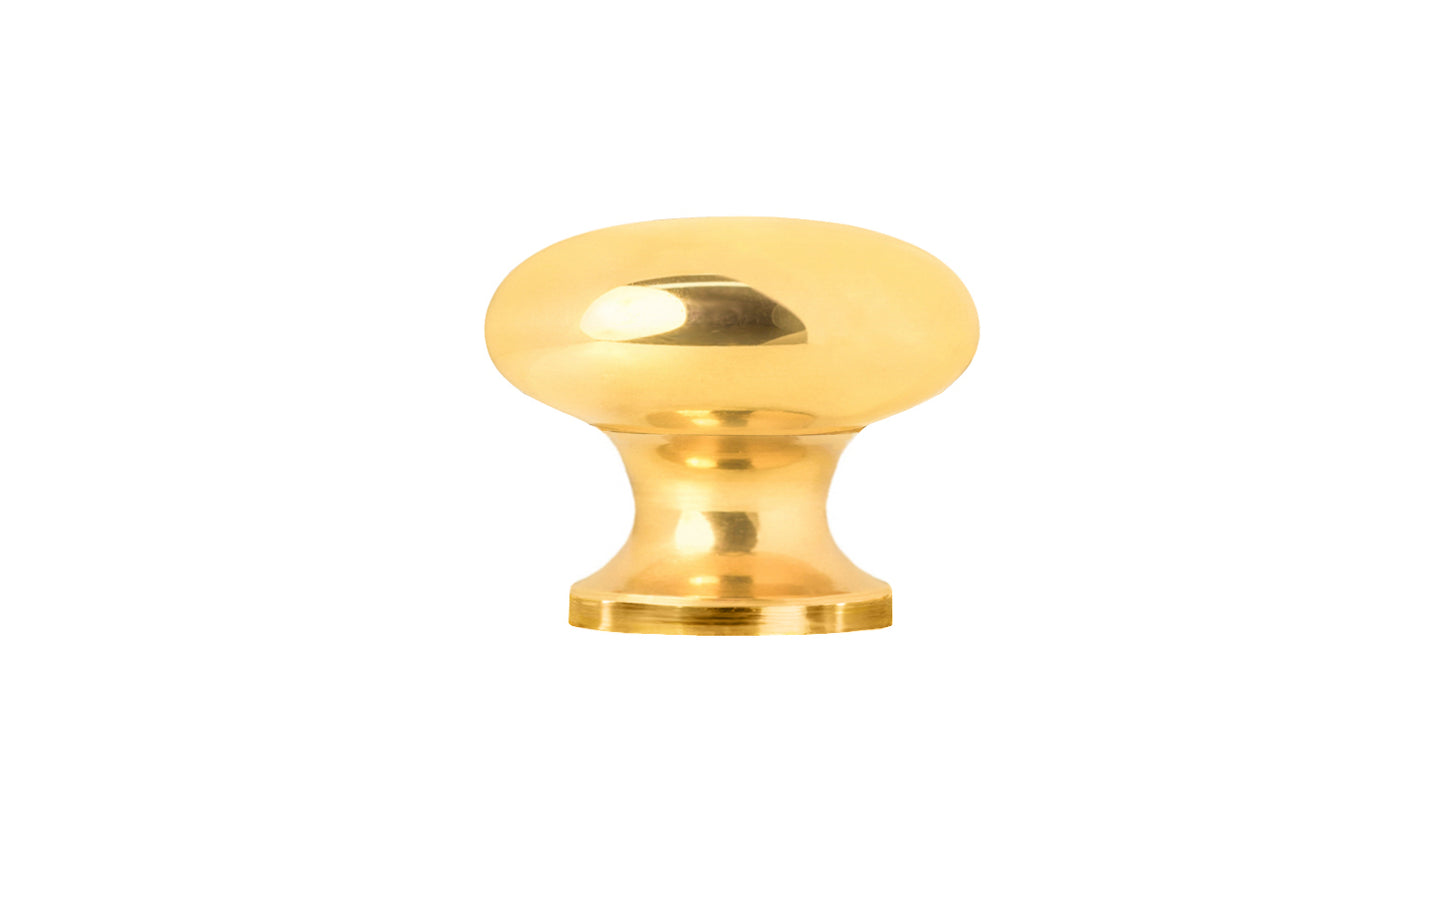 A classic & traditional small unlacquered solid brass mini knob. 3/4" diameter. The knob is made of non-lacquered brass (the unlacquered brass will patina over time). The mini "mushroom" knob is ideal for small drawers, bookcases, cubbyholes, small boxes, & other small furniture pieces & cabinets. Non-Lacquered Brass (will patina naturally over time)